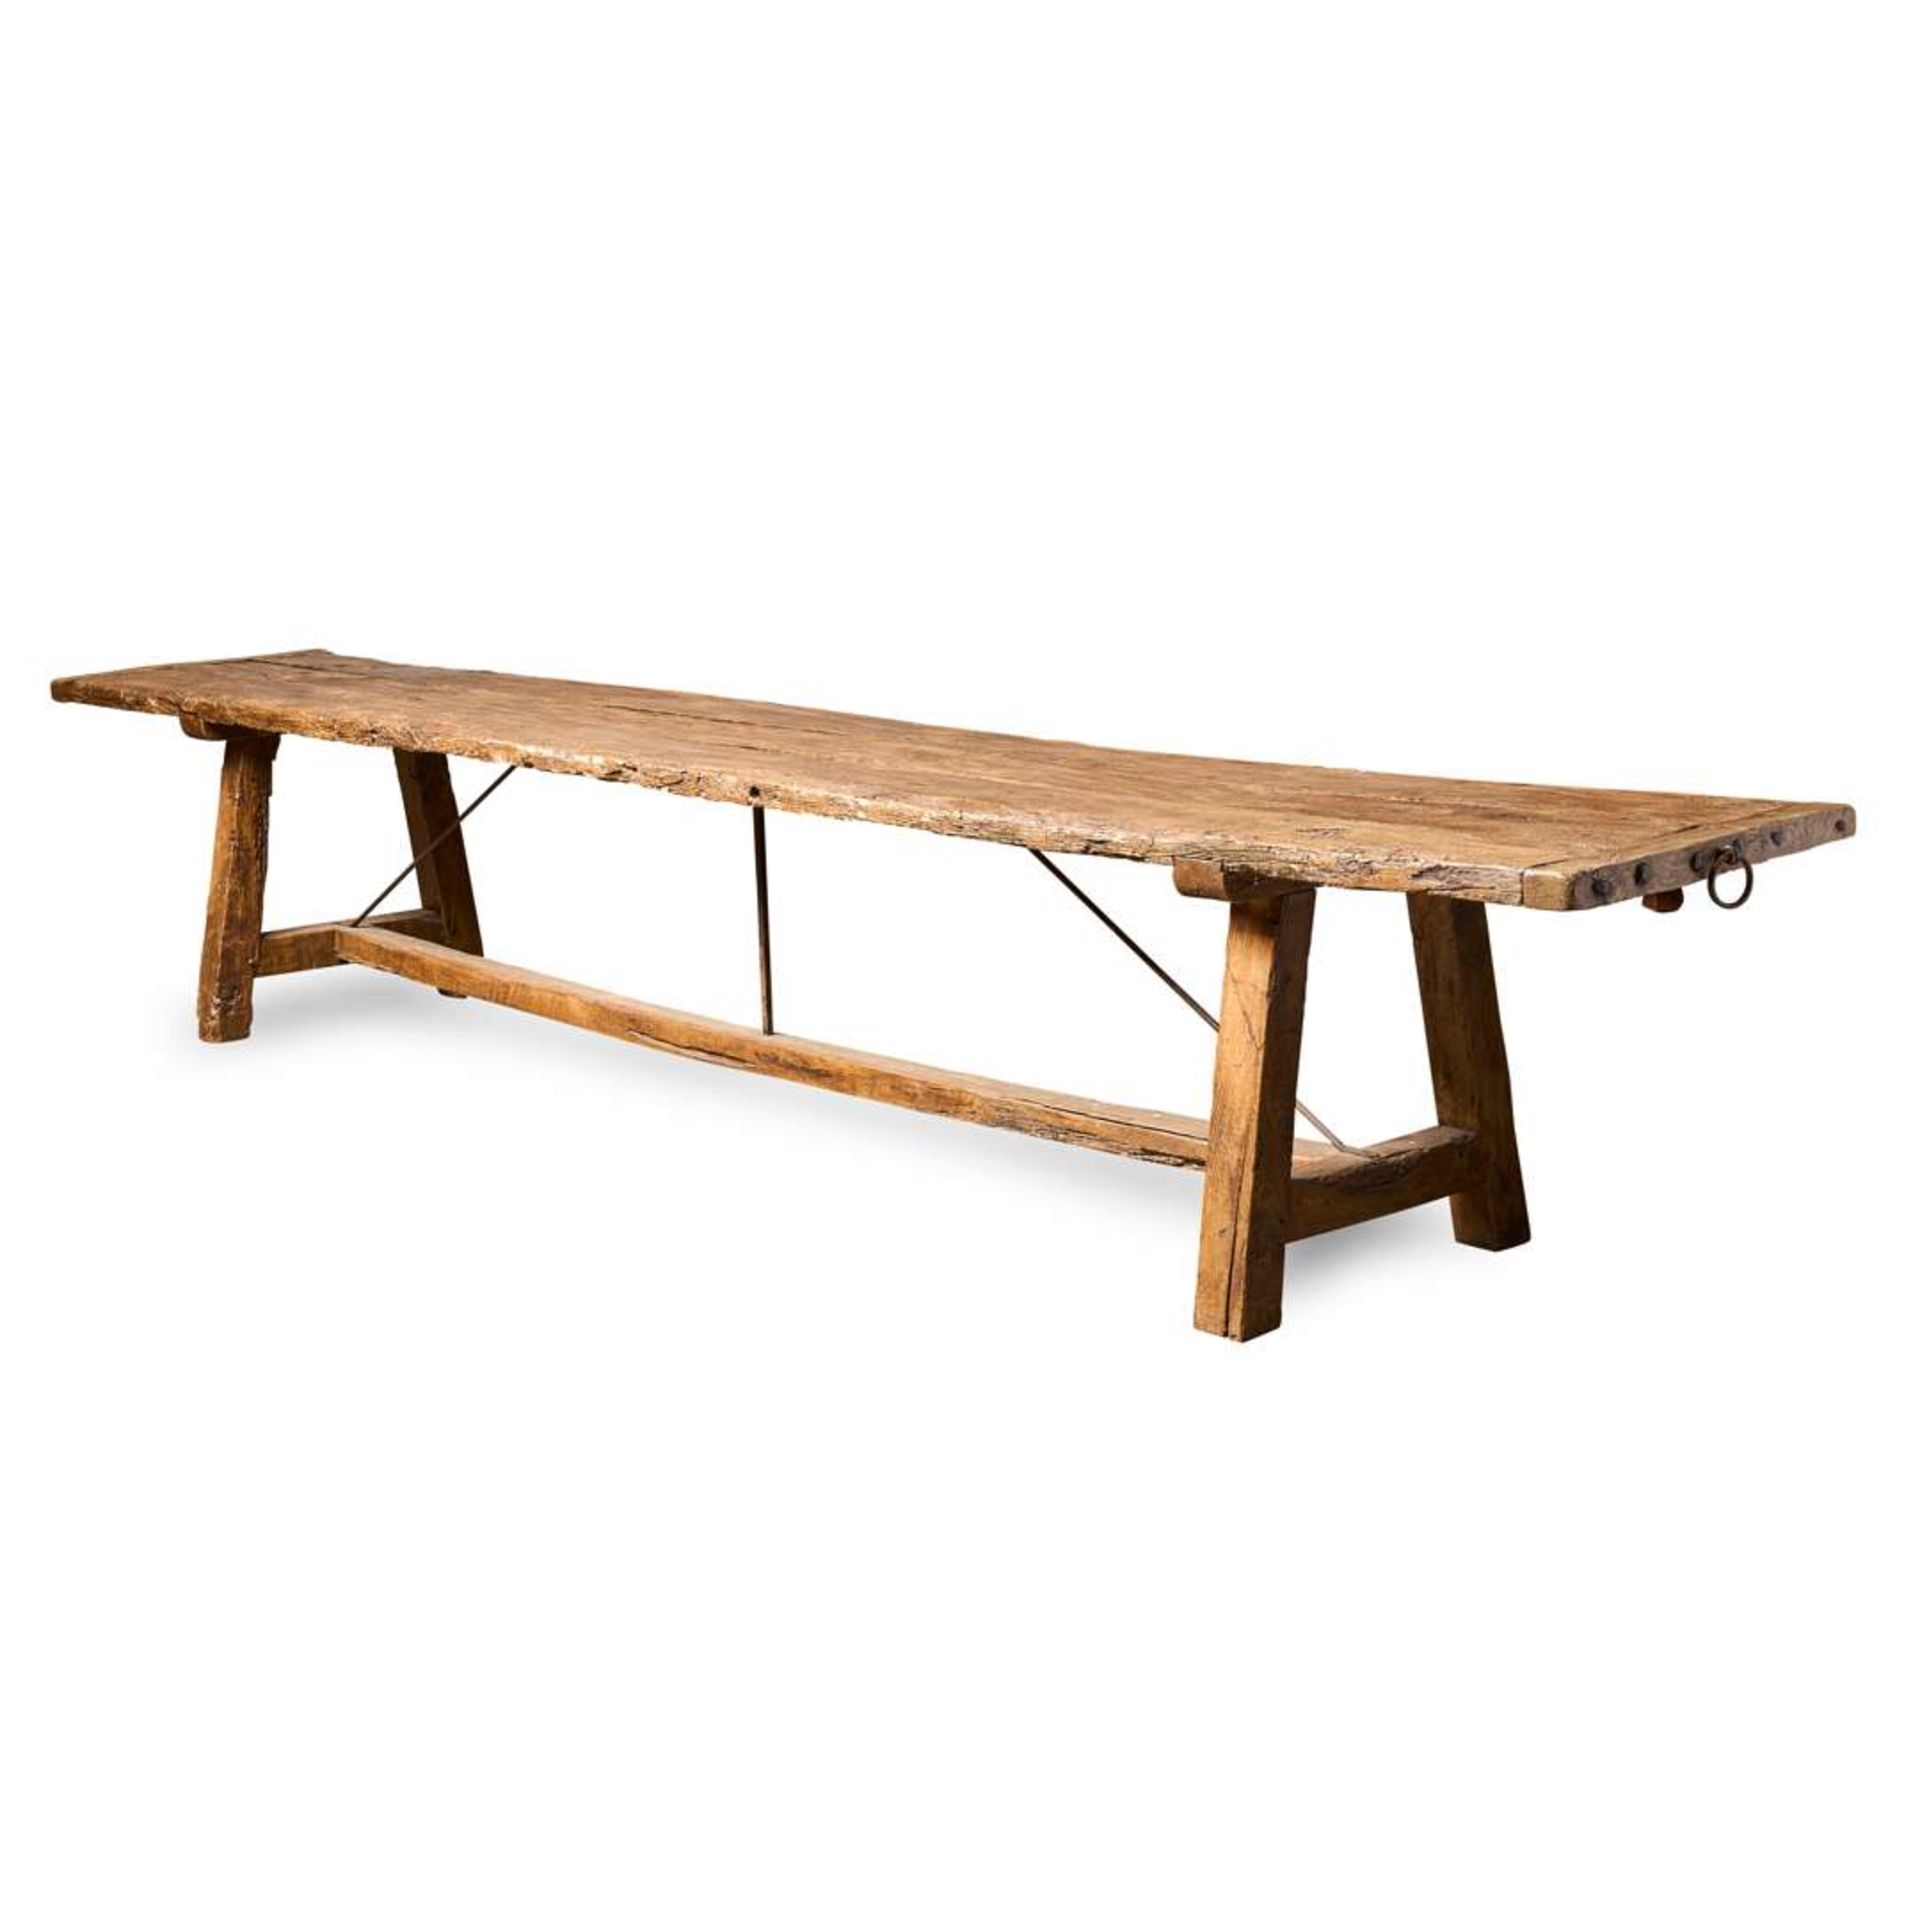 EXCEPTIONALLY LONG PROVINCIAL GEORGIAN ELM REFECTORY TABLE